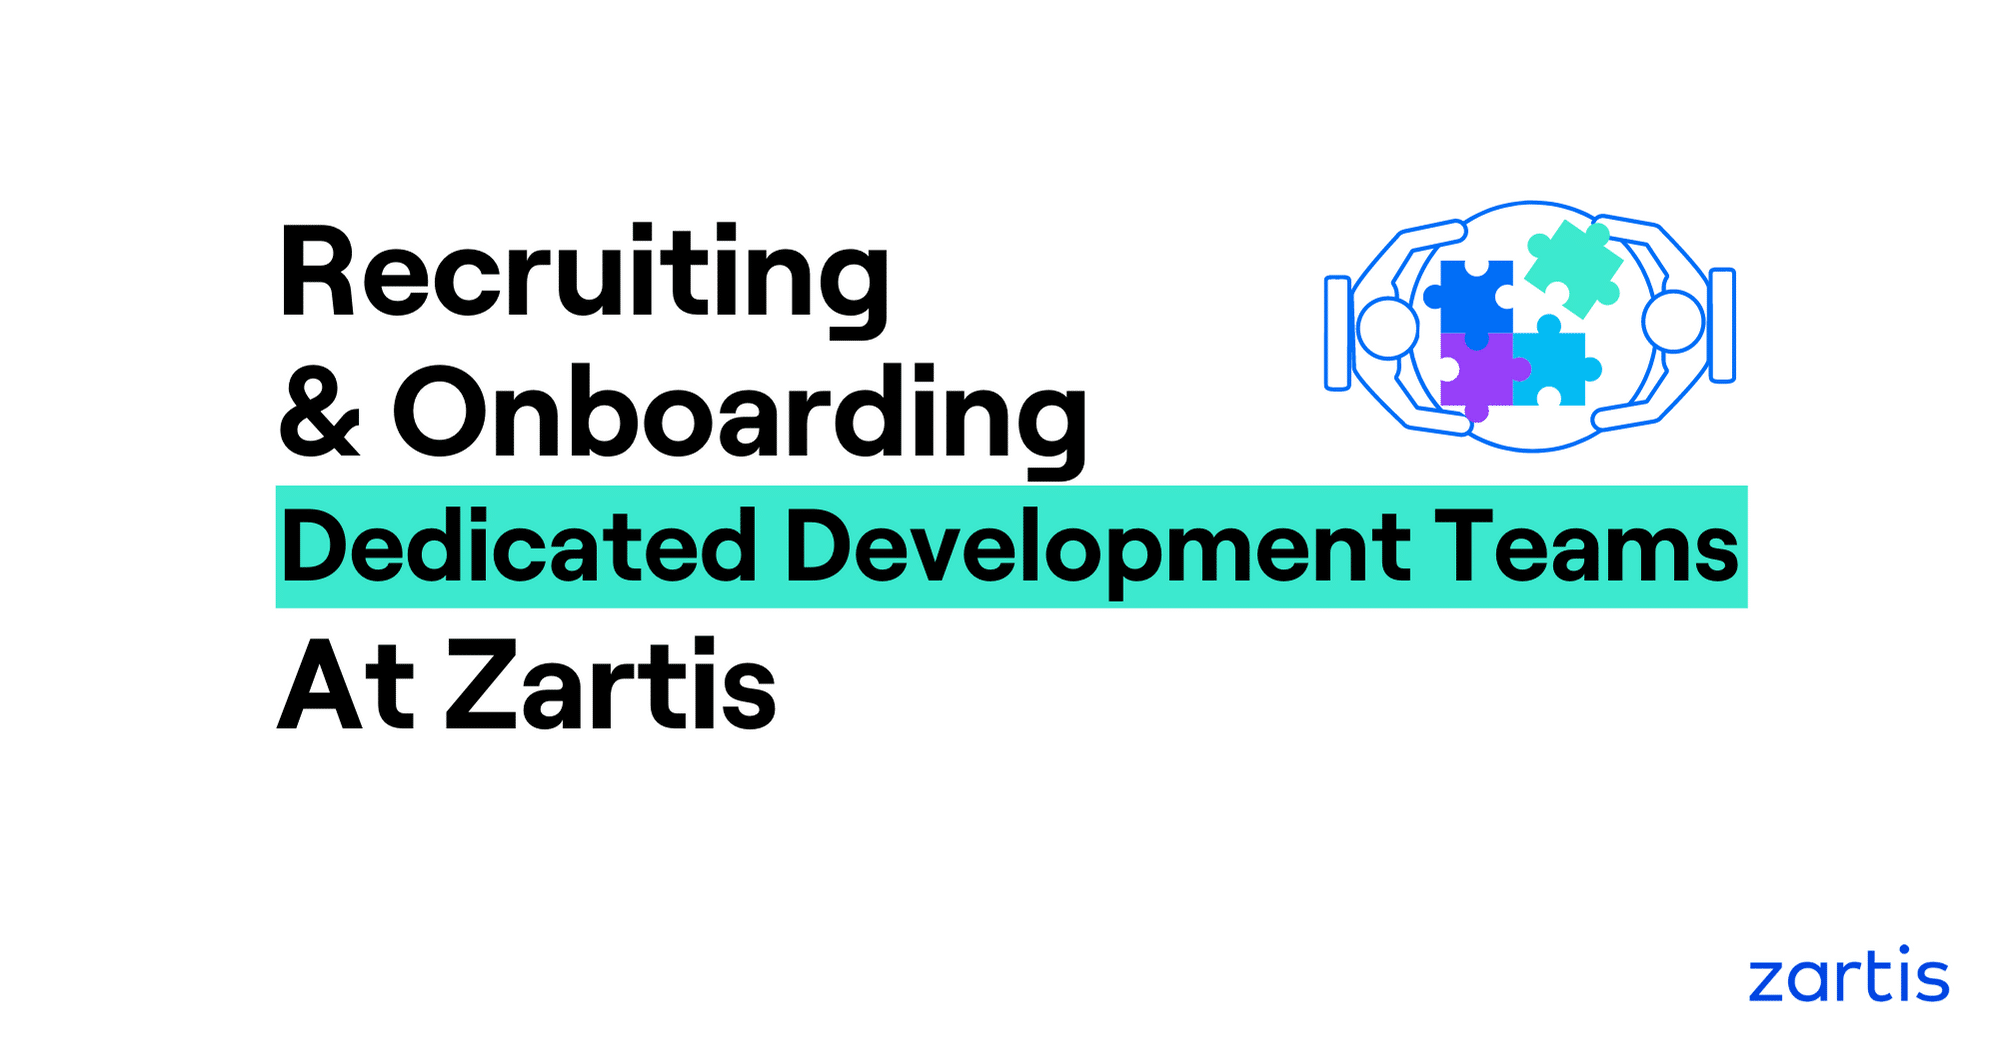 Hiring and Onboarding Dedicated Development Teams with Zartis